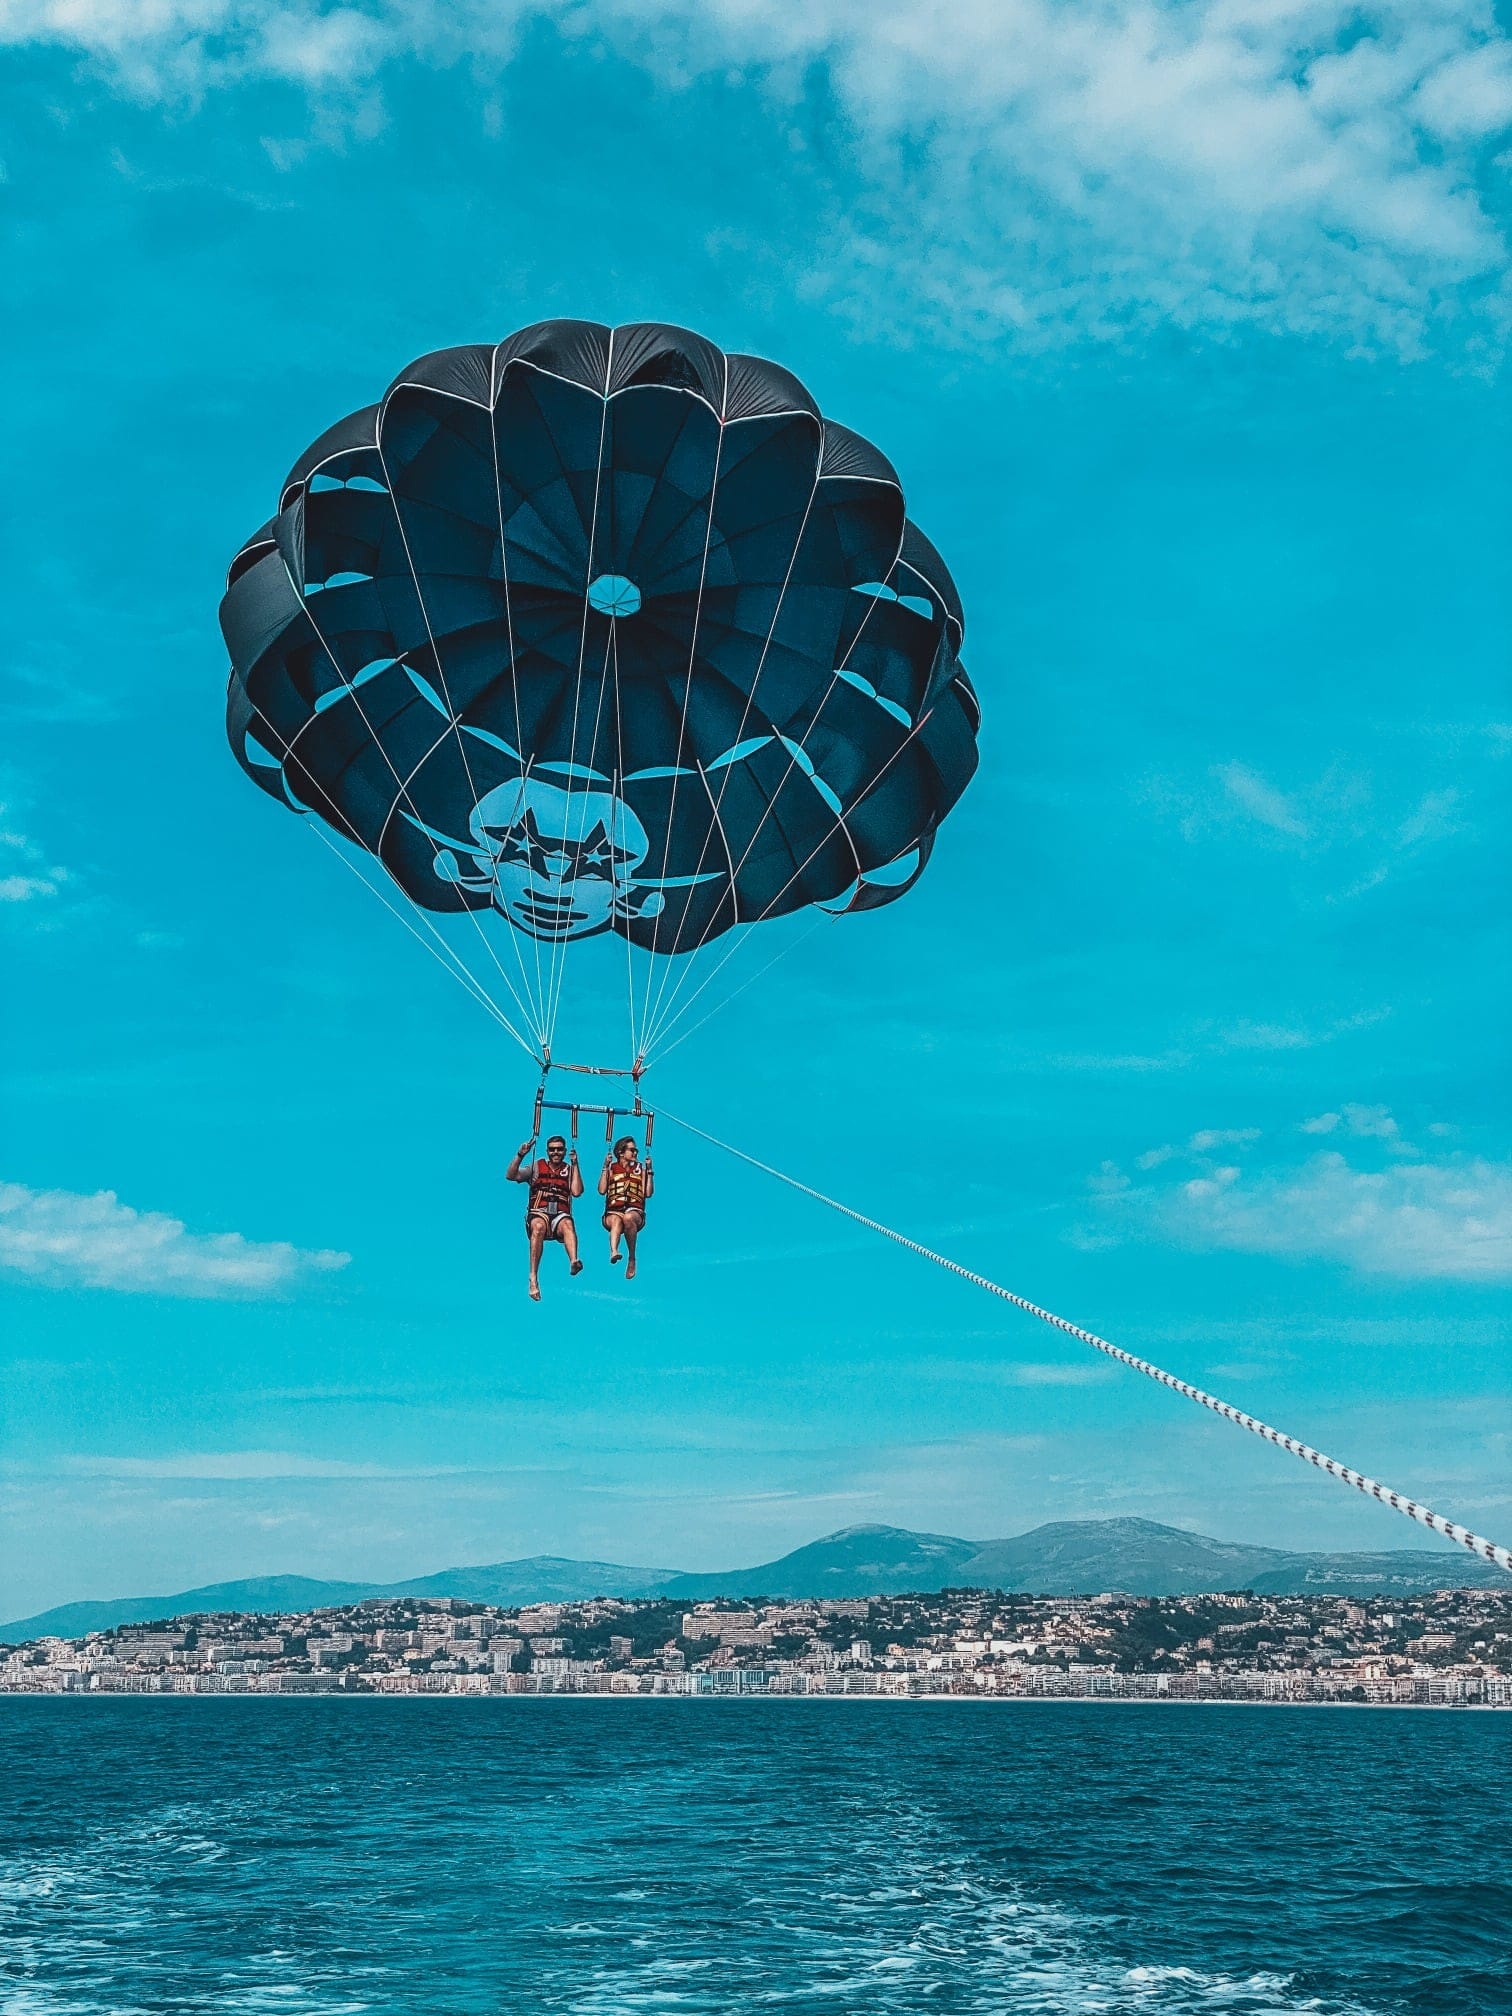 Parasailing: Flying in the air, Tandem, A water sport, Flights between 600 and 800 feet, Nizza, Parachuting. 1520x2020 HD Background.